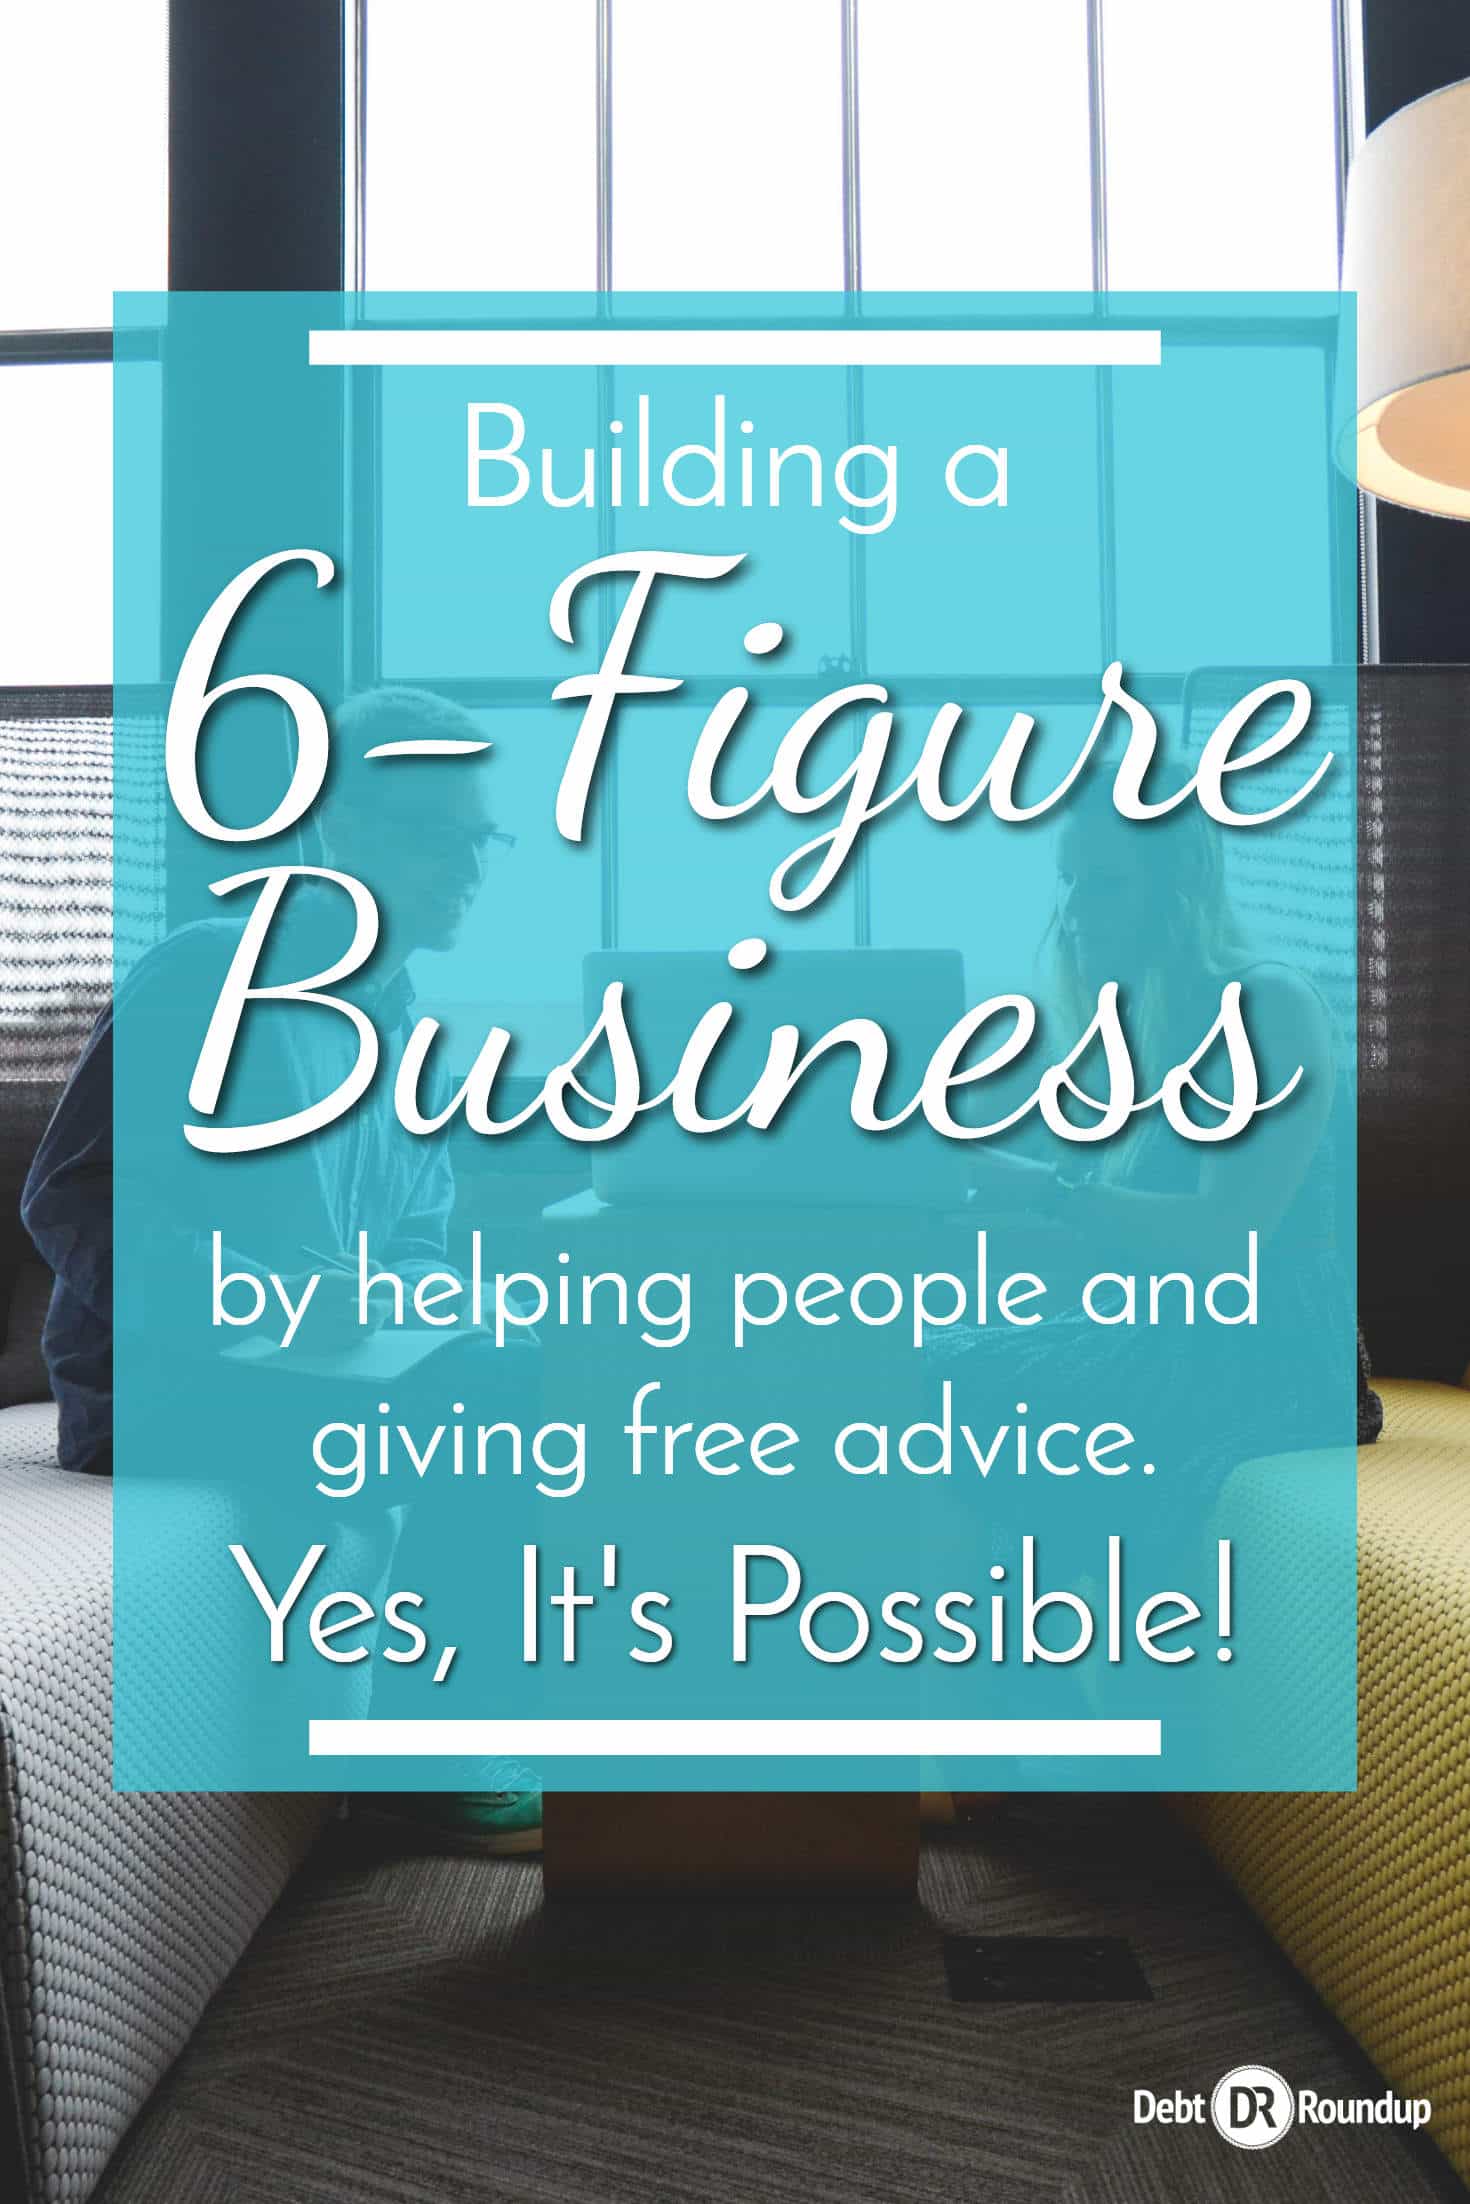 Creating a six-figure business by helping people